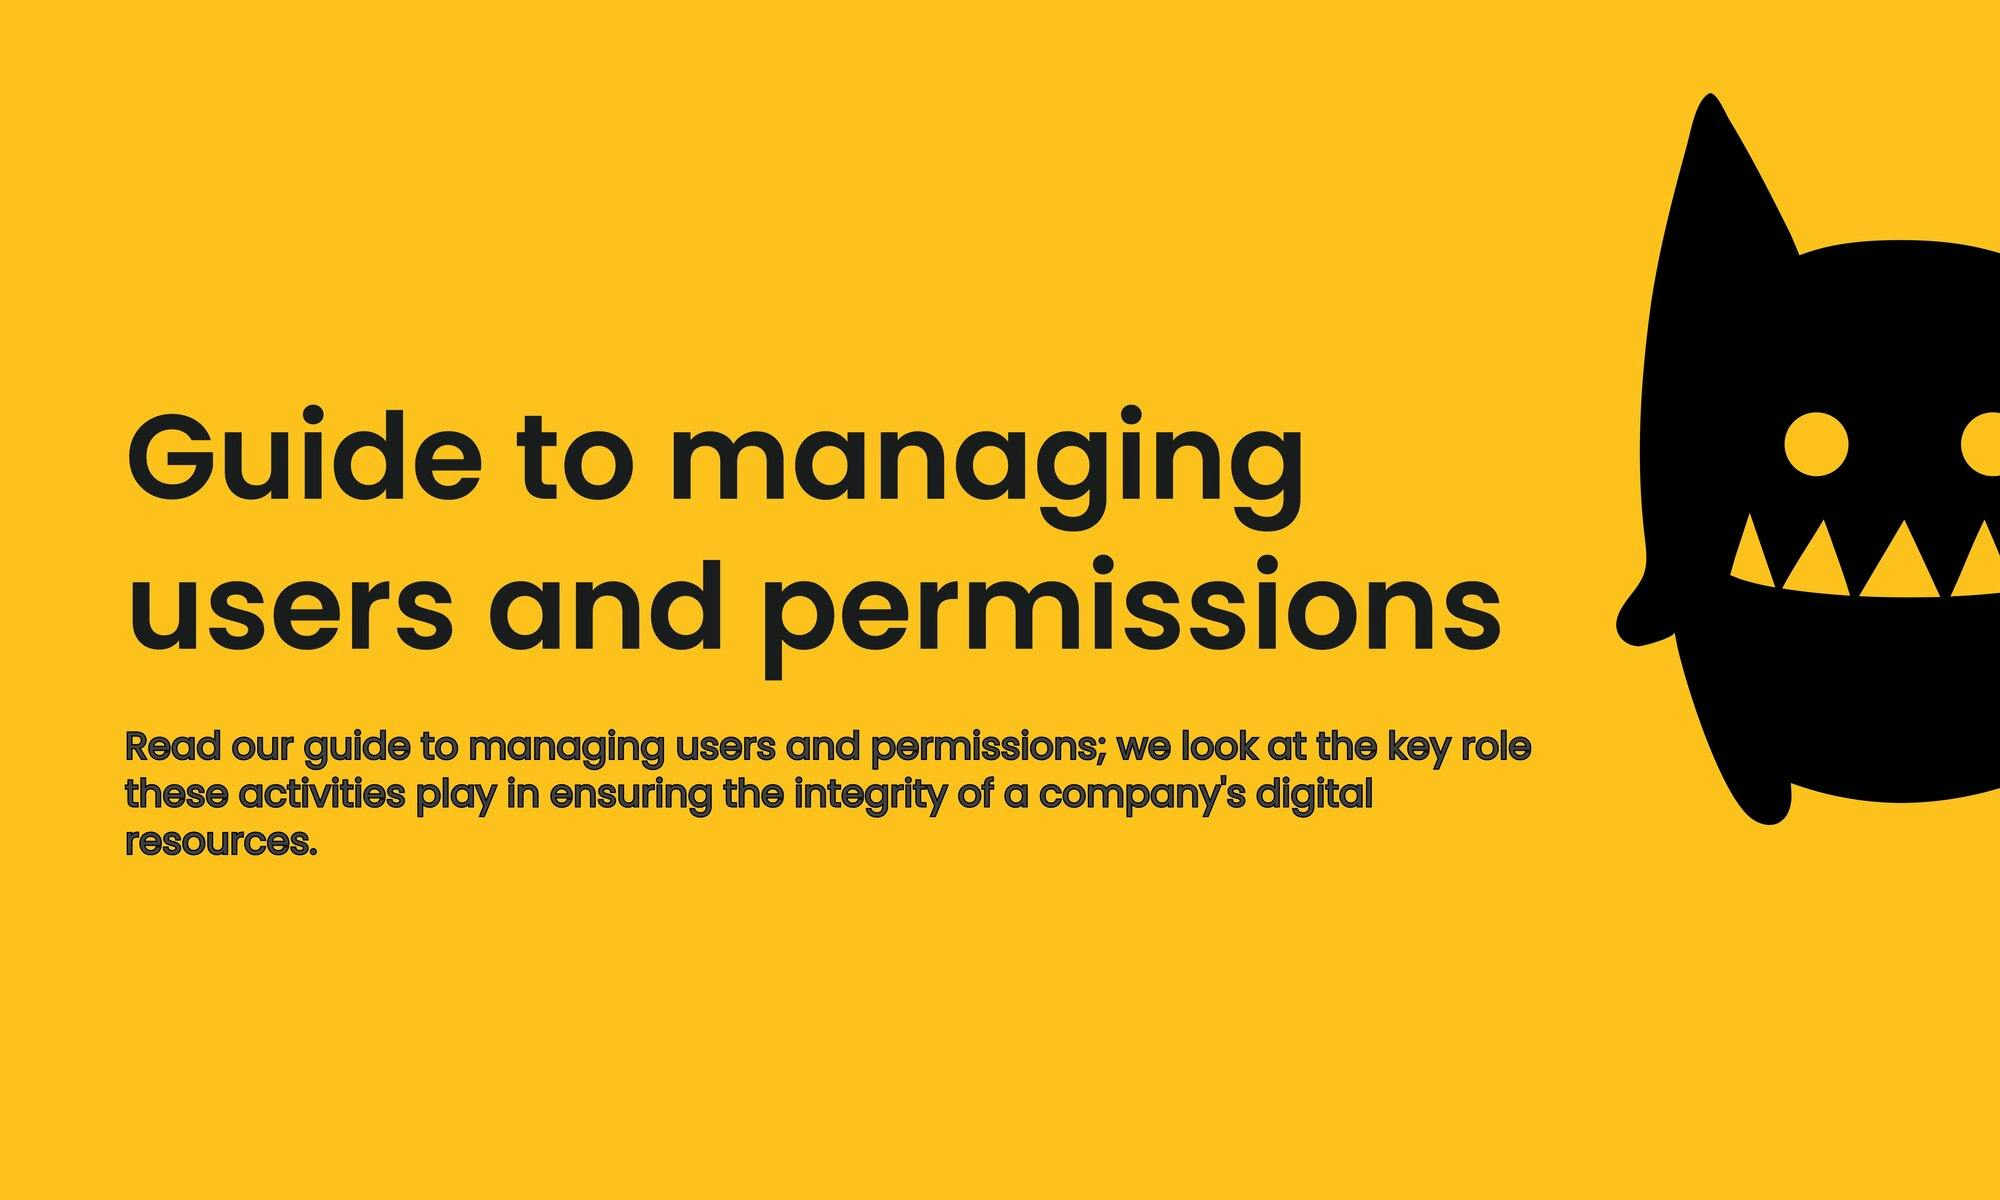 Guide to managing users and permissions